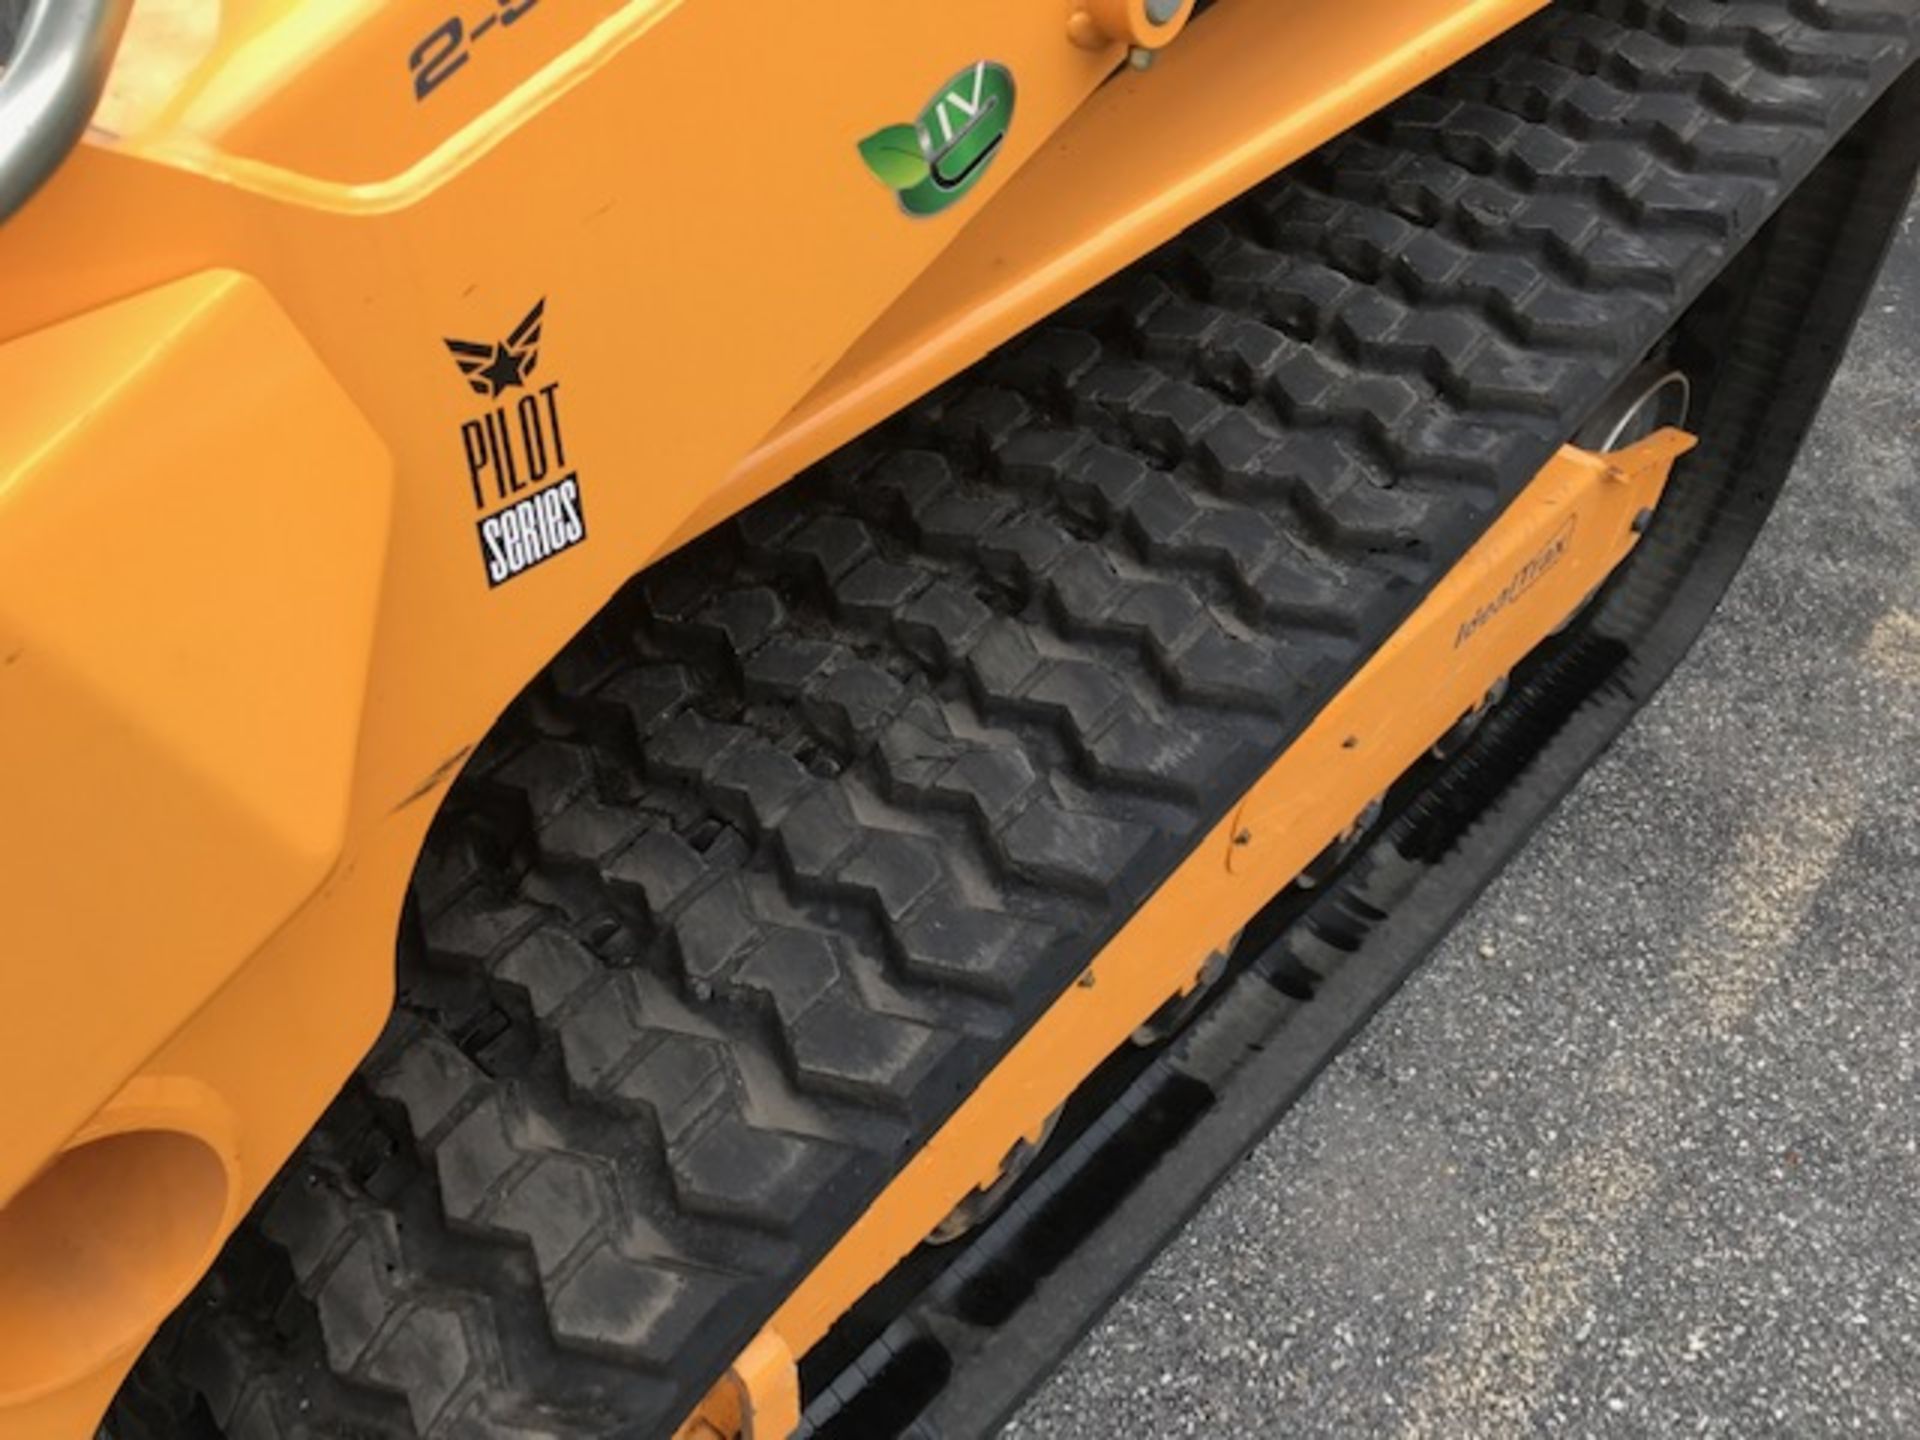 2018 MUSTANG TRACK SKID STEER #2150RT LOADER, HOURS 187, DELUXE AIR RIDE SUSPENSION, HEAT, A/C, SELF - Image 12 of 13